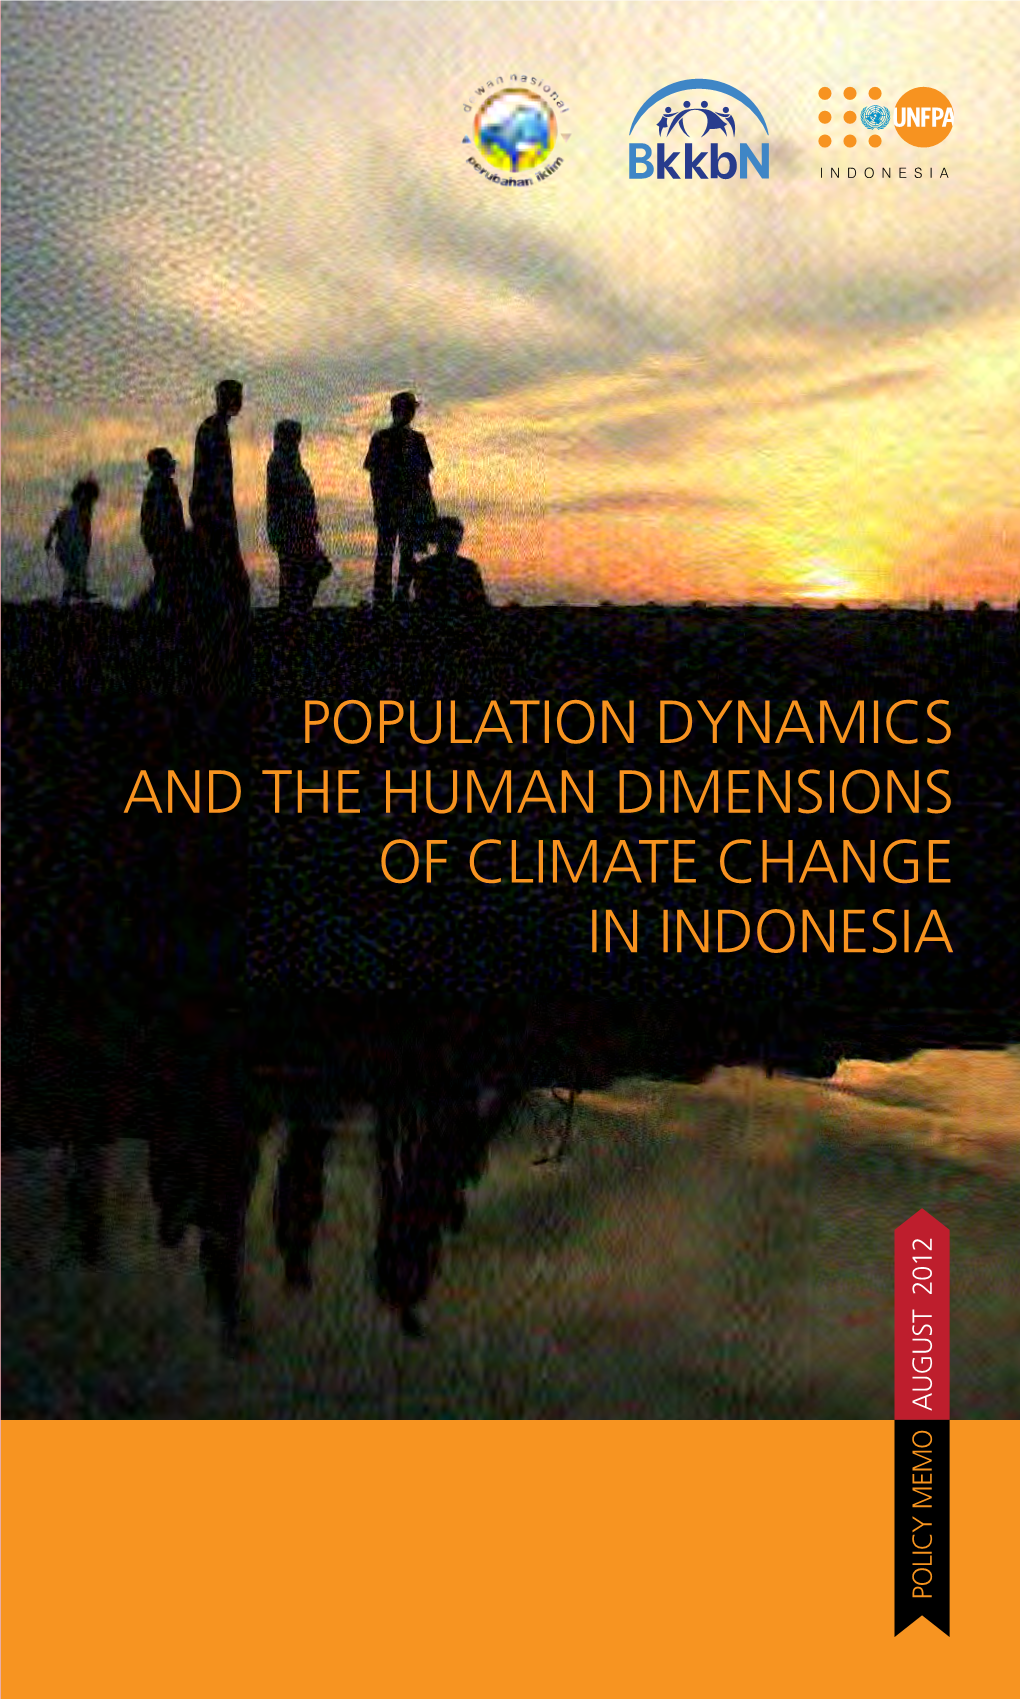 Population Dynamics and the Human Dimensions of Climate Change in Indonesia Policy Memo August 2012